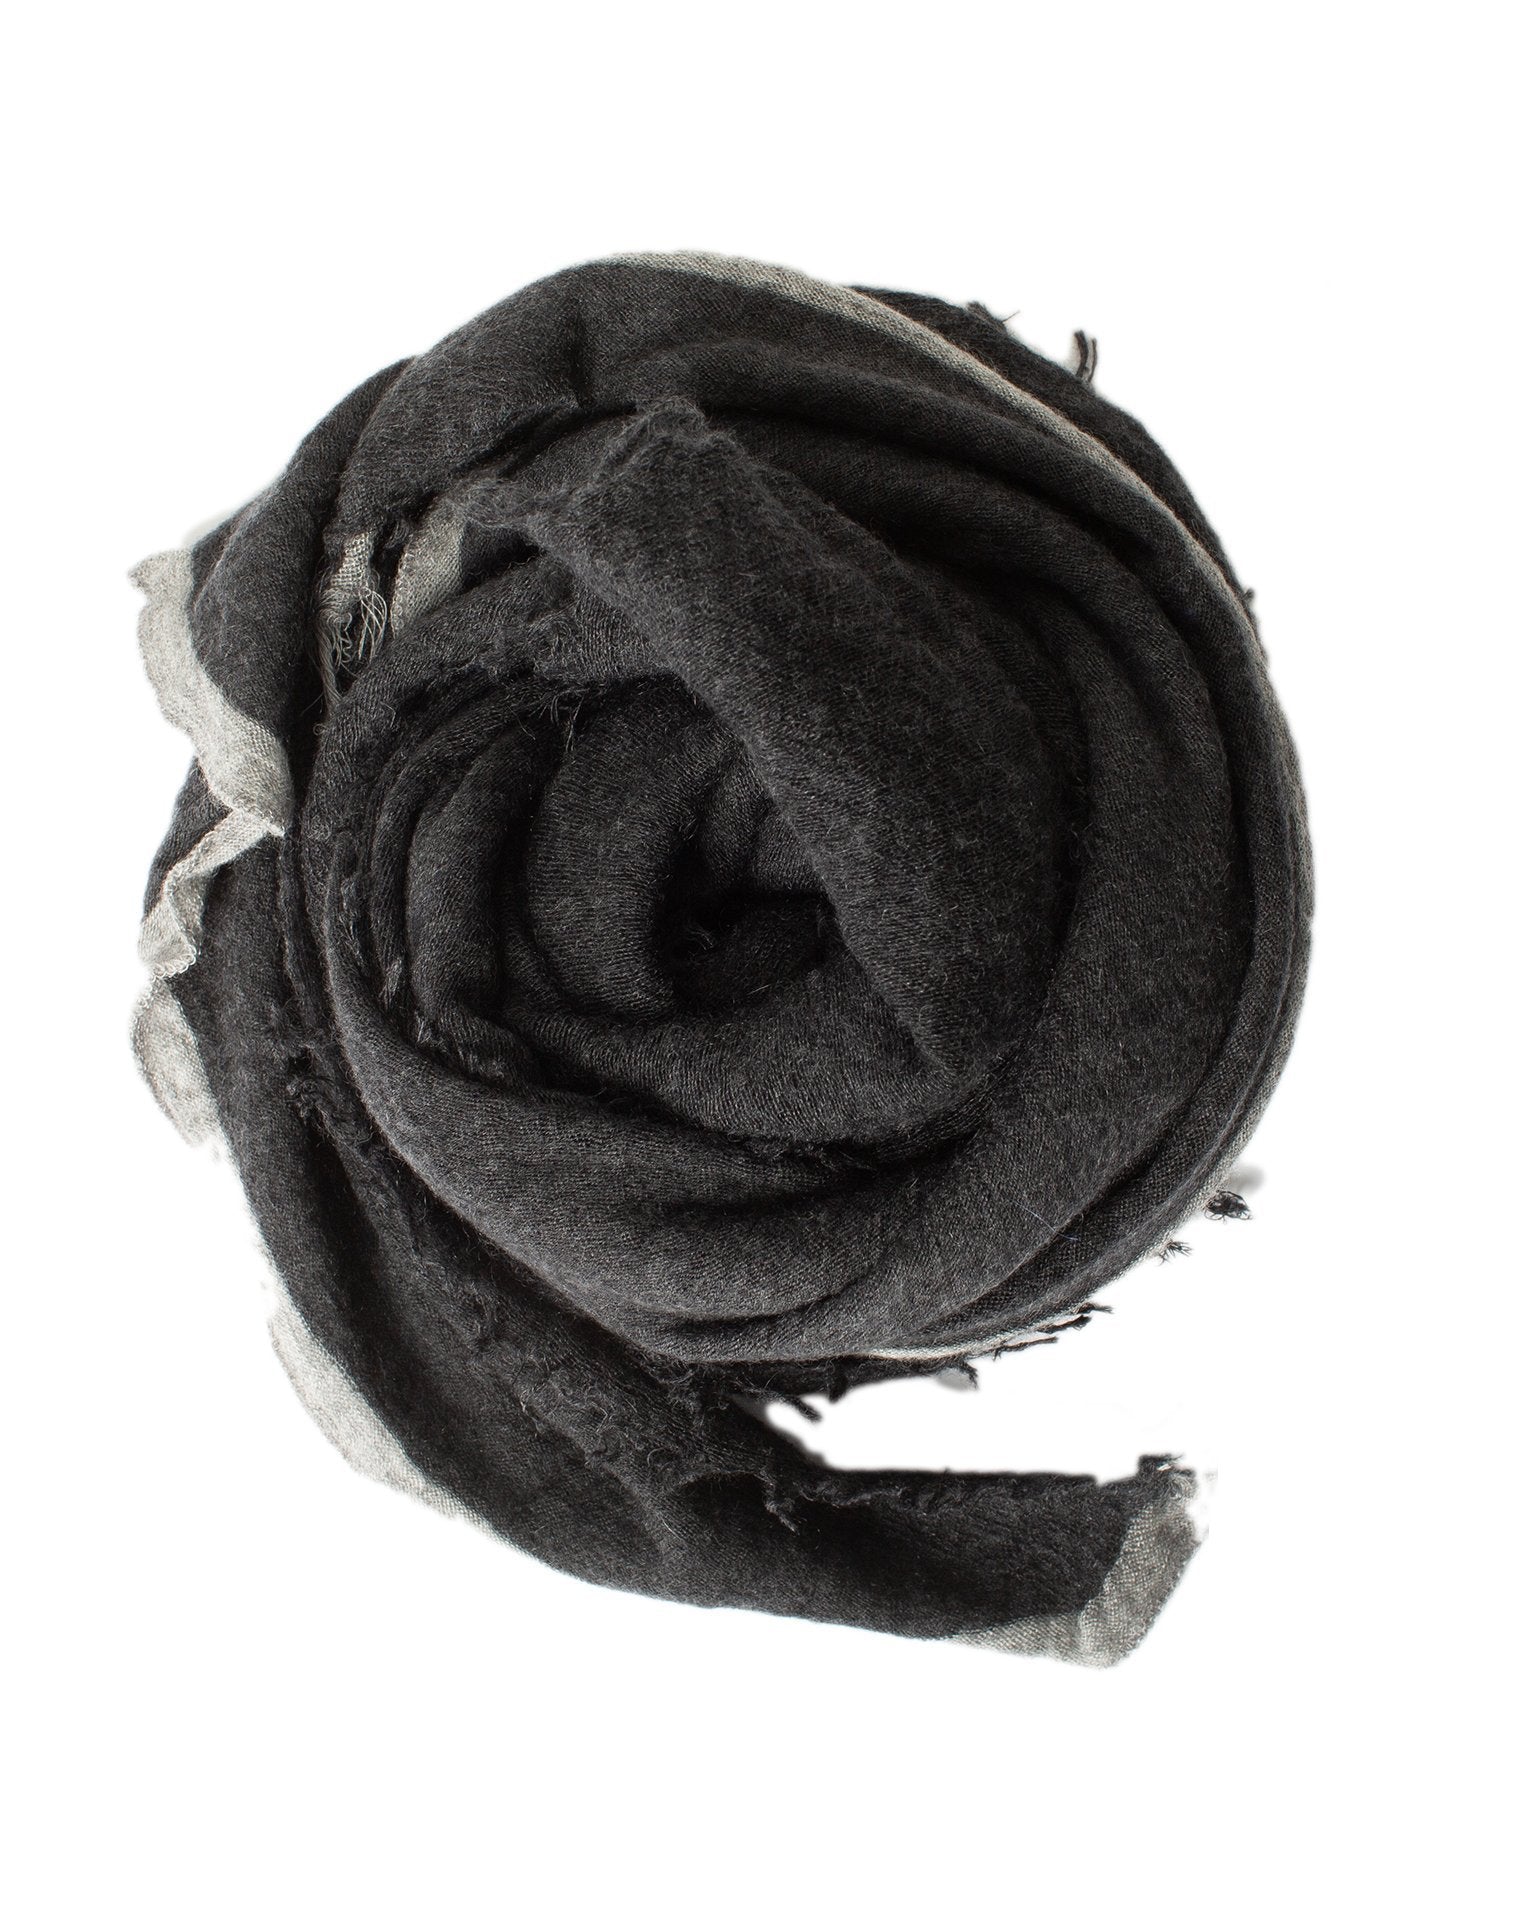 Rosa Cashmere Scarf in Charcoal x Heather Grey